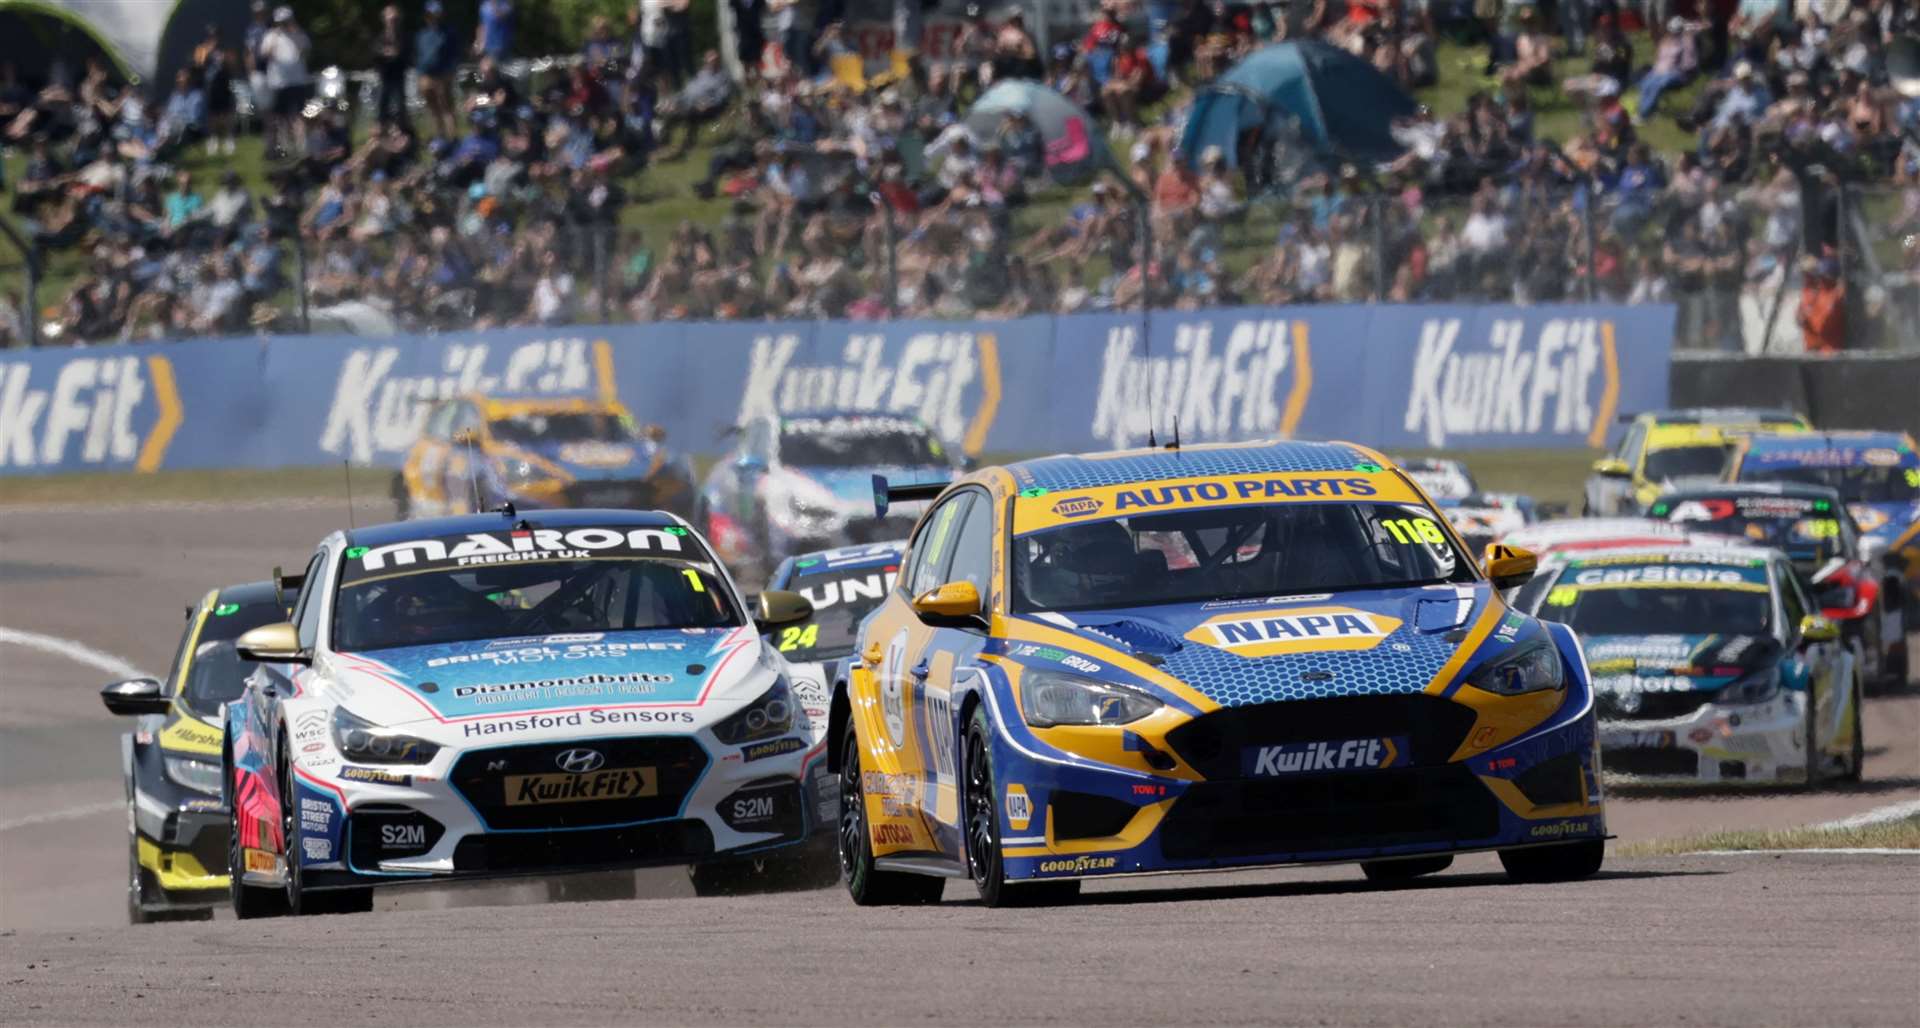 Motorbase Performance NAPA Racing's Ash Sutton, right, leads the field at Thruxton. Picture: BTCC/Jakob Ebrey